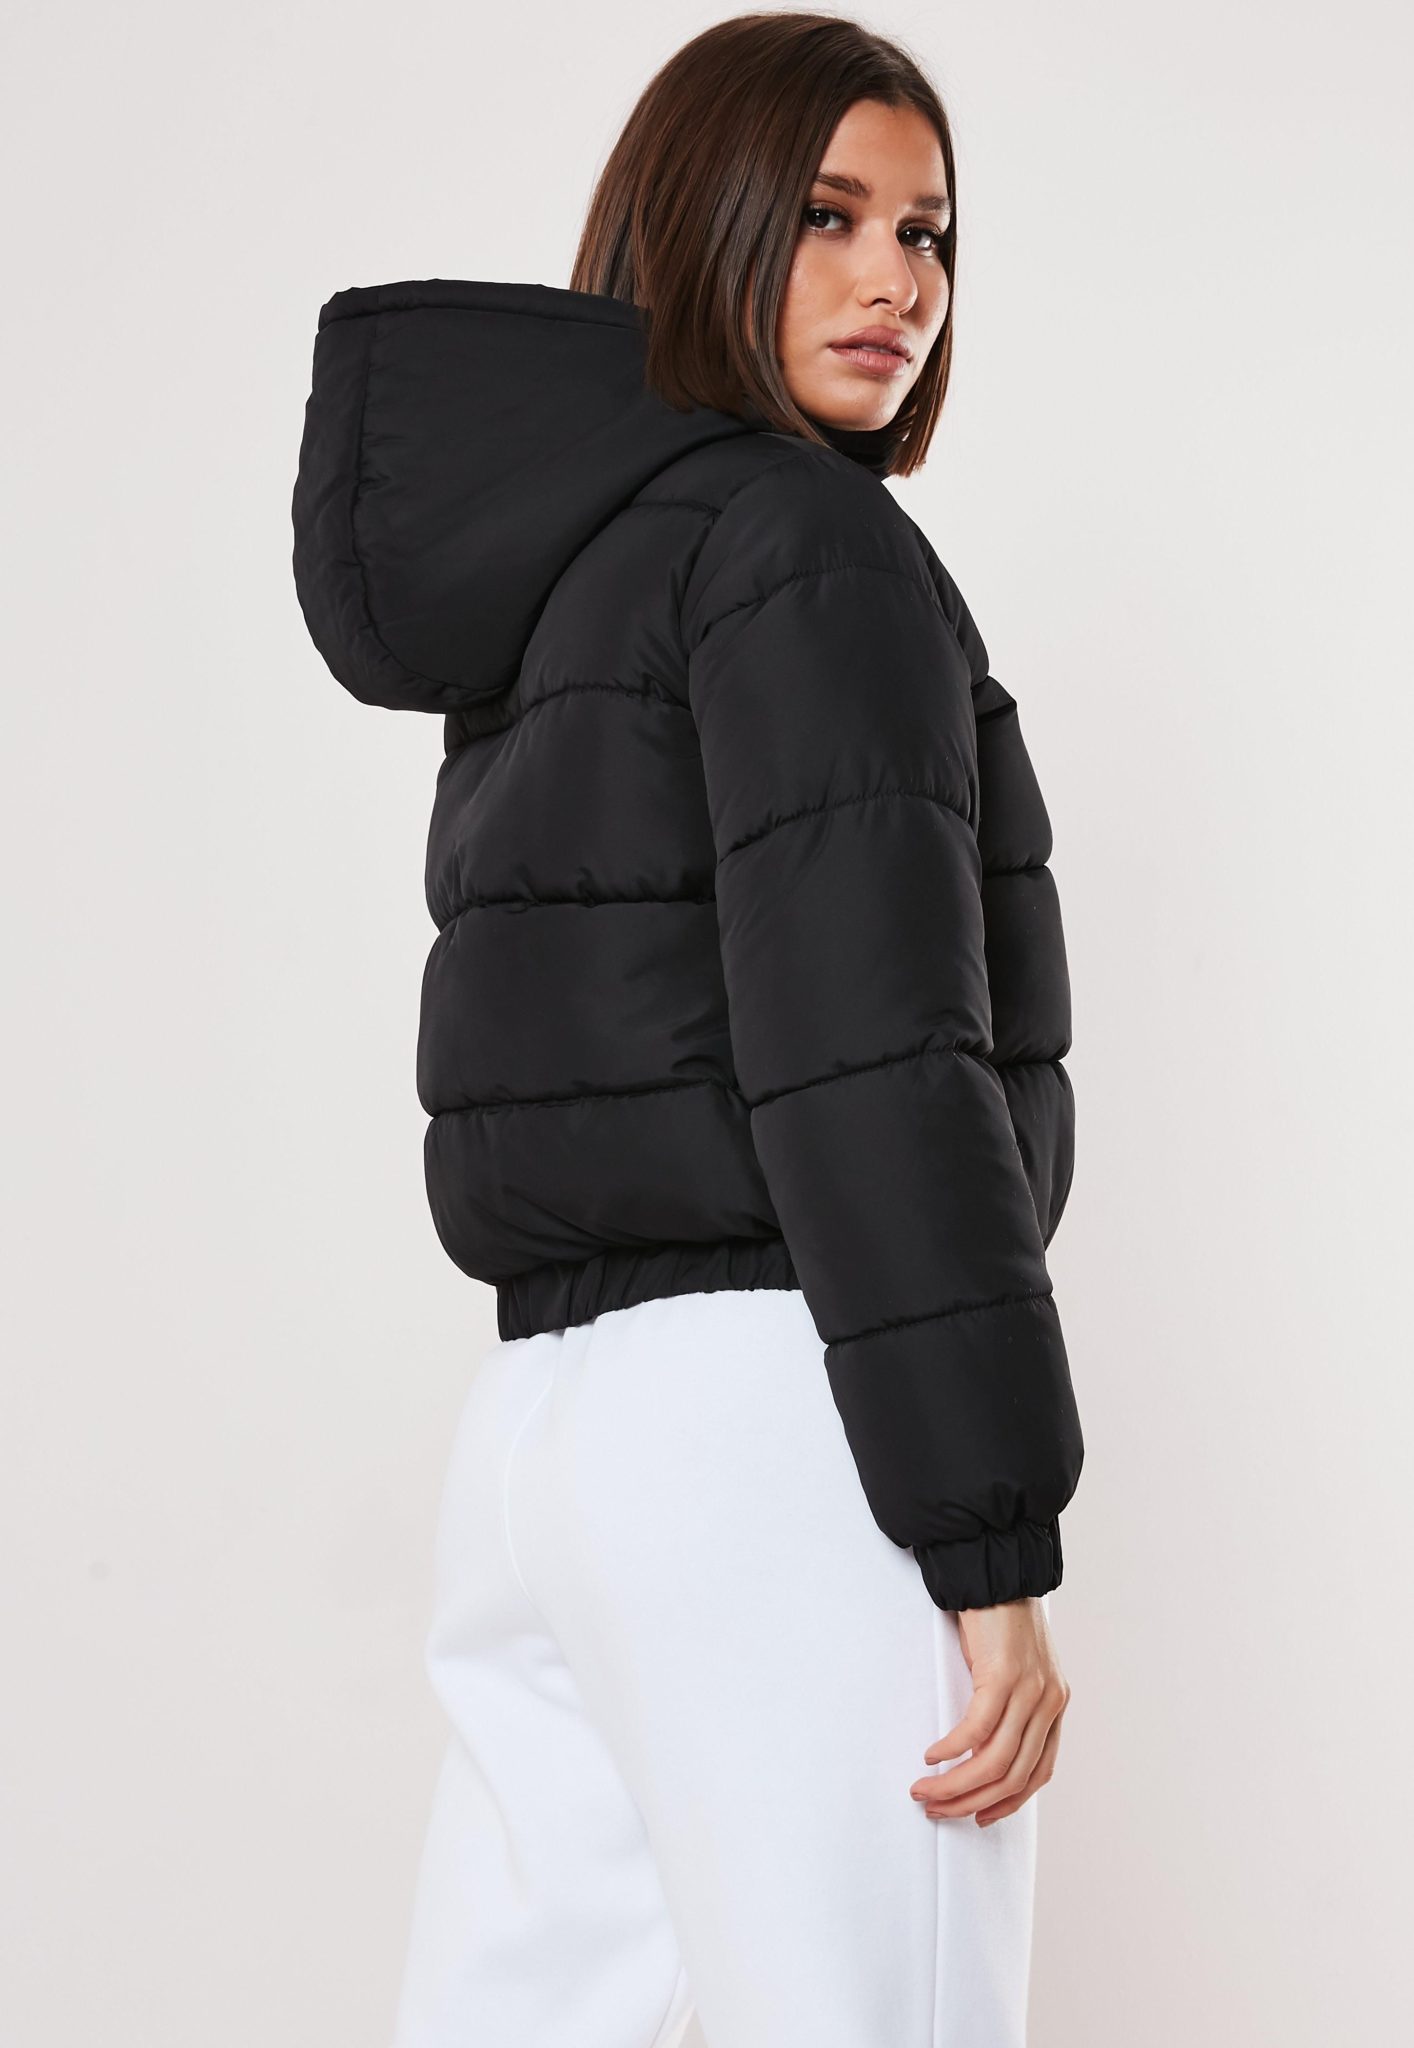 The Popularity Behind Puffer Jackets The Streets Fashion and Music